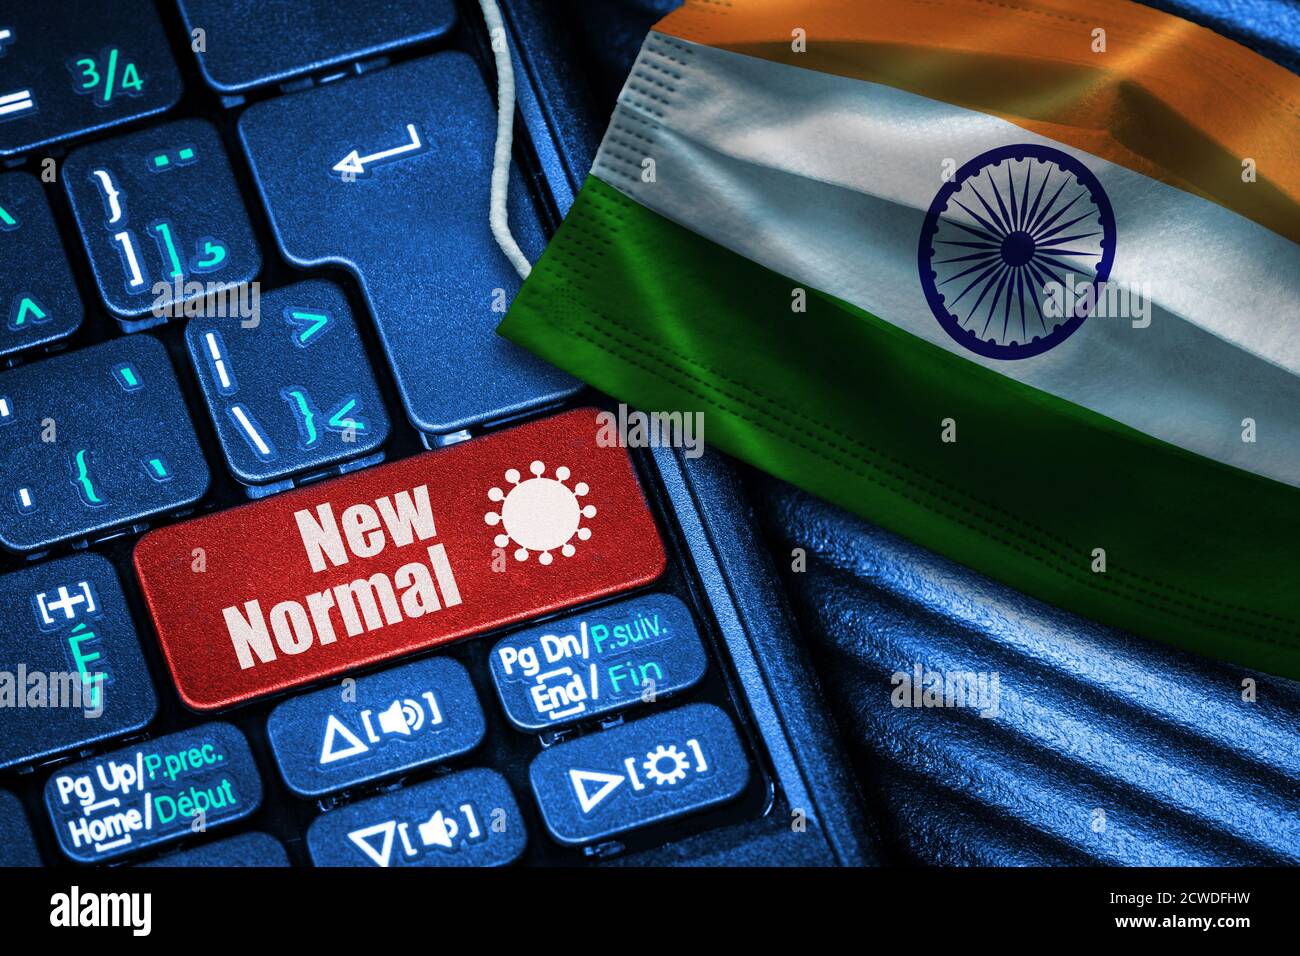 Concept of New Normal in India during Covid-19 with computer keyboard red button text and face mask showing Indian Flag. Stock Photo